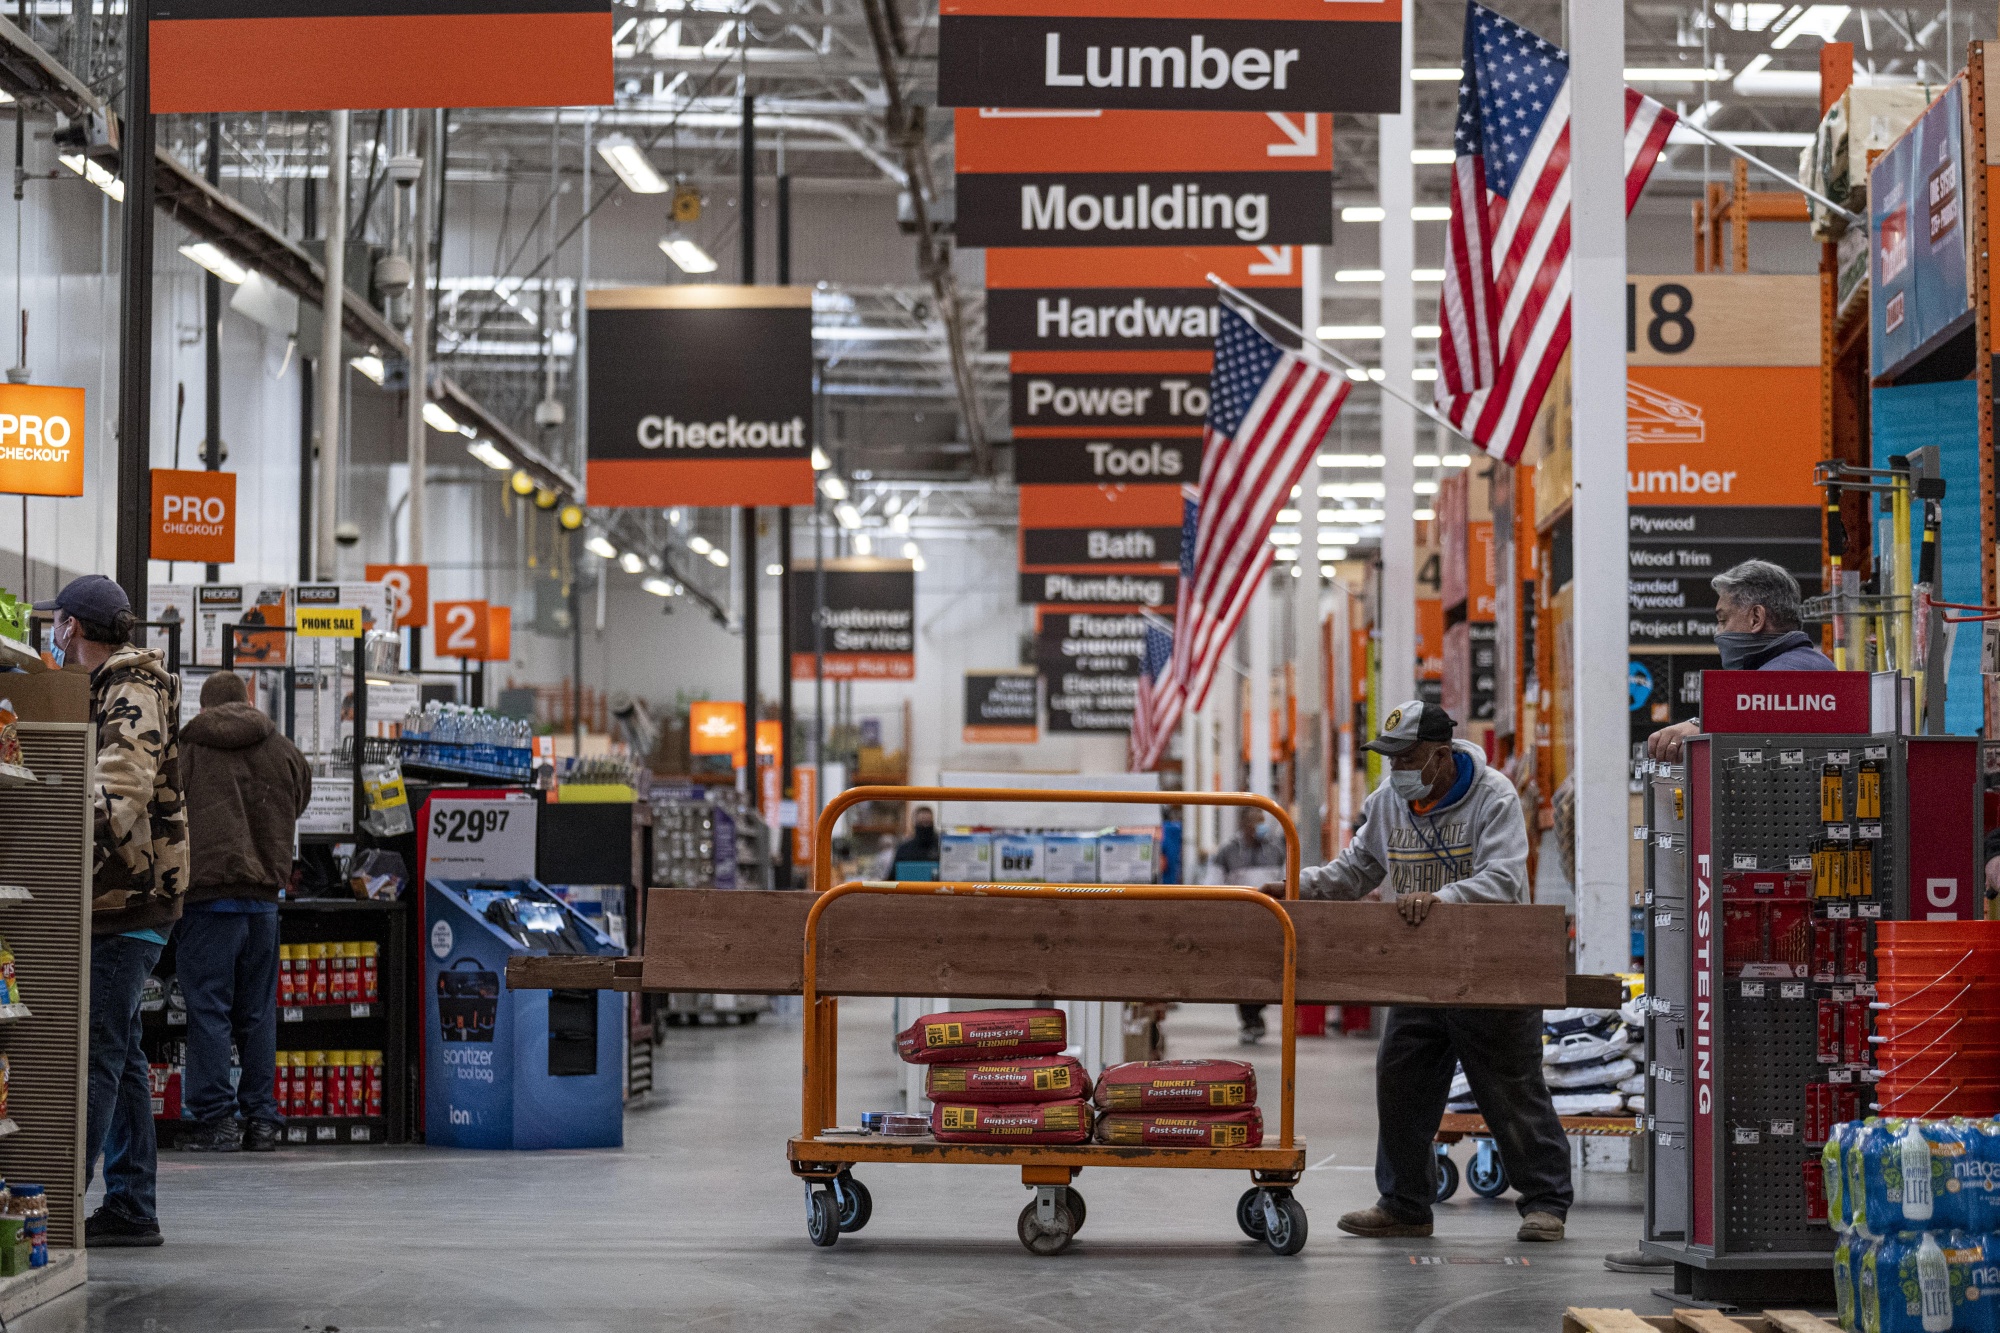 Lowe's, Home Depot Turn to Livestreaming to Build on Covid Gains - Bloomberg